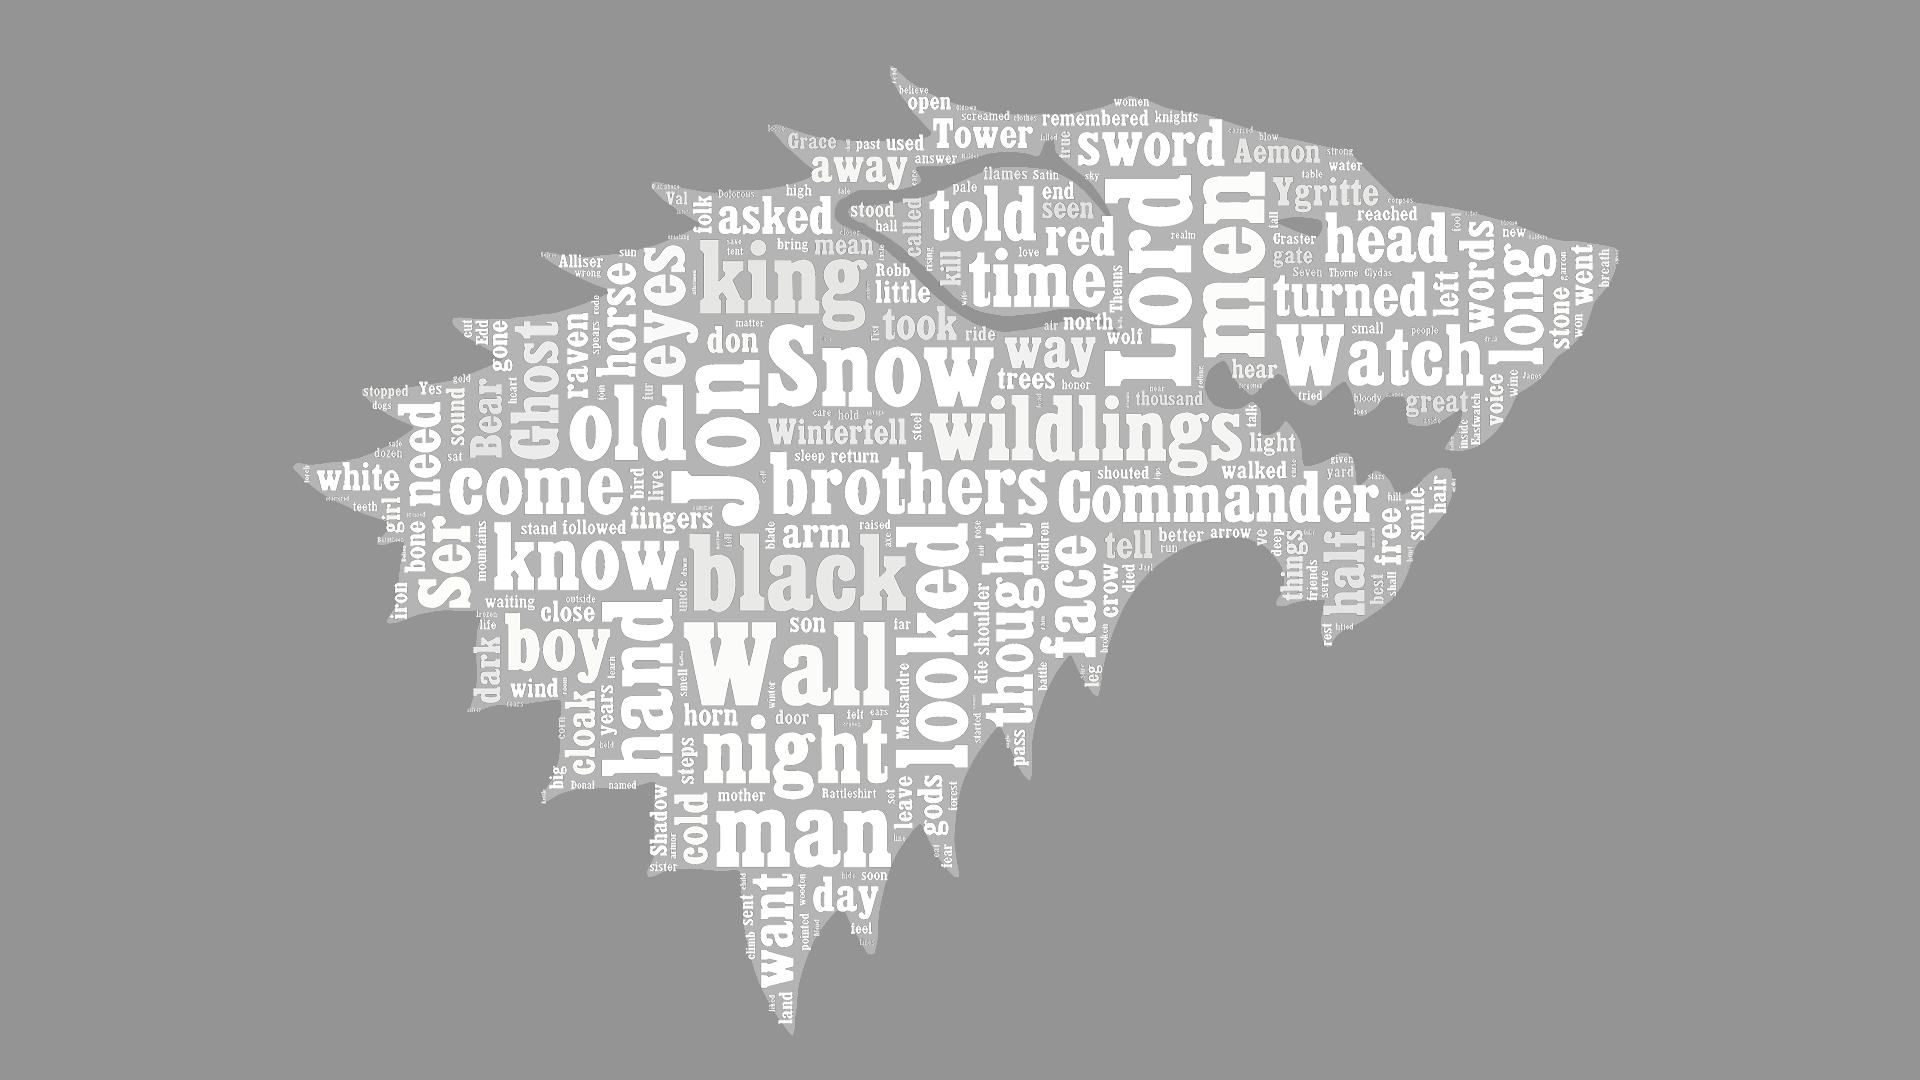 A Song Of Ice And Fire Image Asoiaf Word Cloud Jon Snow HD